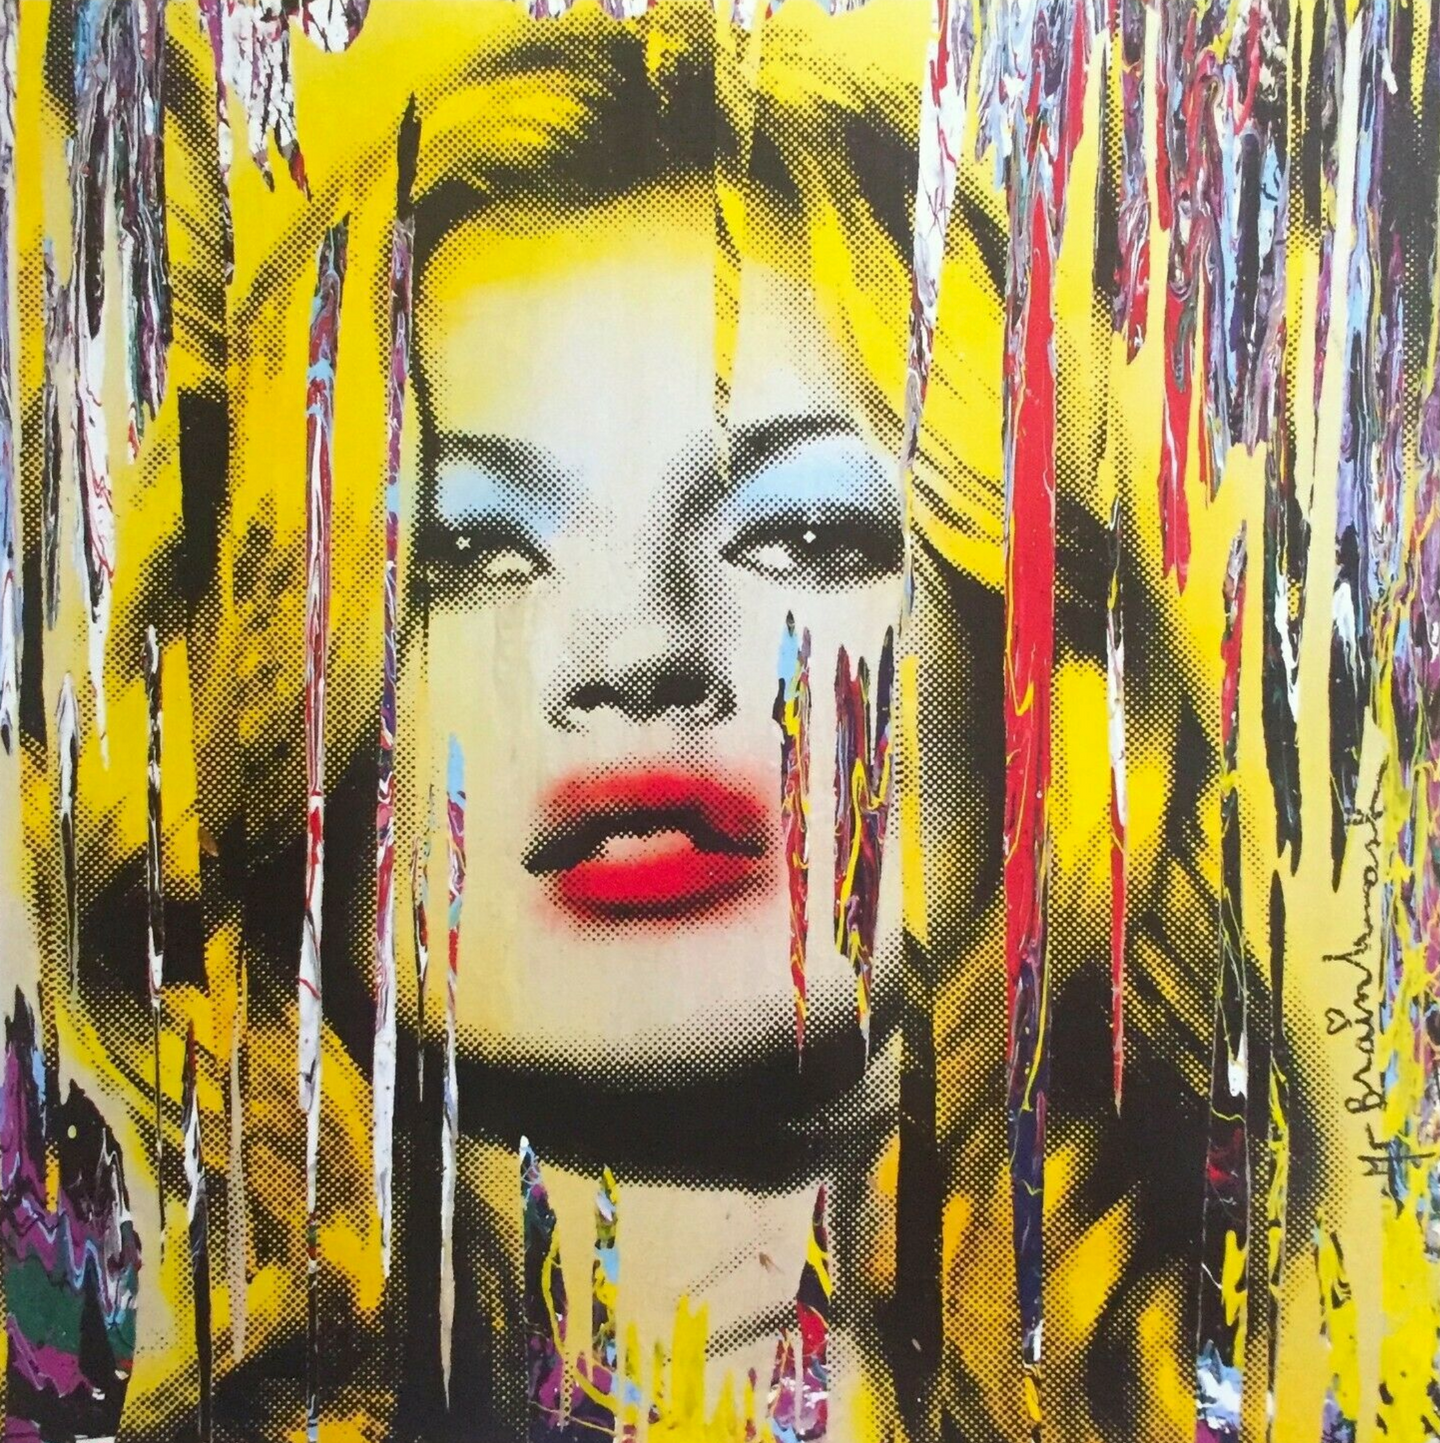 Mr Brainwash, Kate Moss, 2009, Lithograph on paper, 24 x 24 inches, unframed, Mr. Brainwash prints for sale